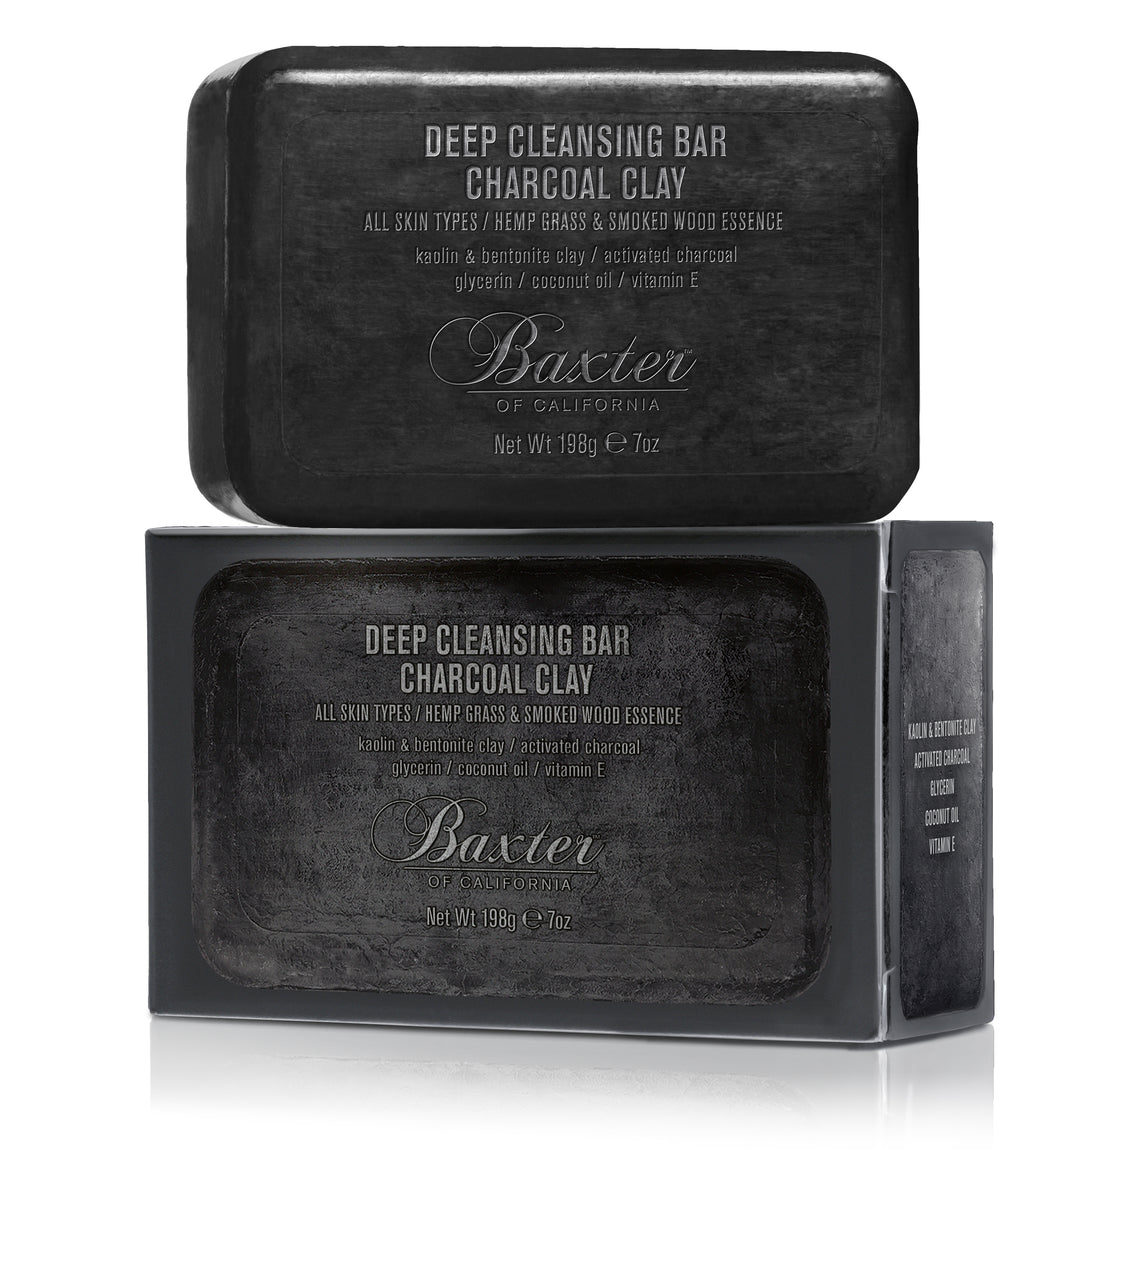 Deep Cleansing Bar, Charcoal Clay 7oz